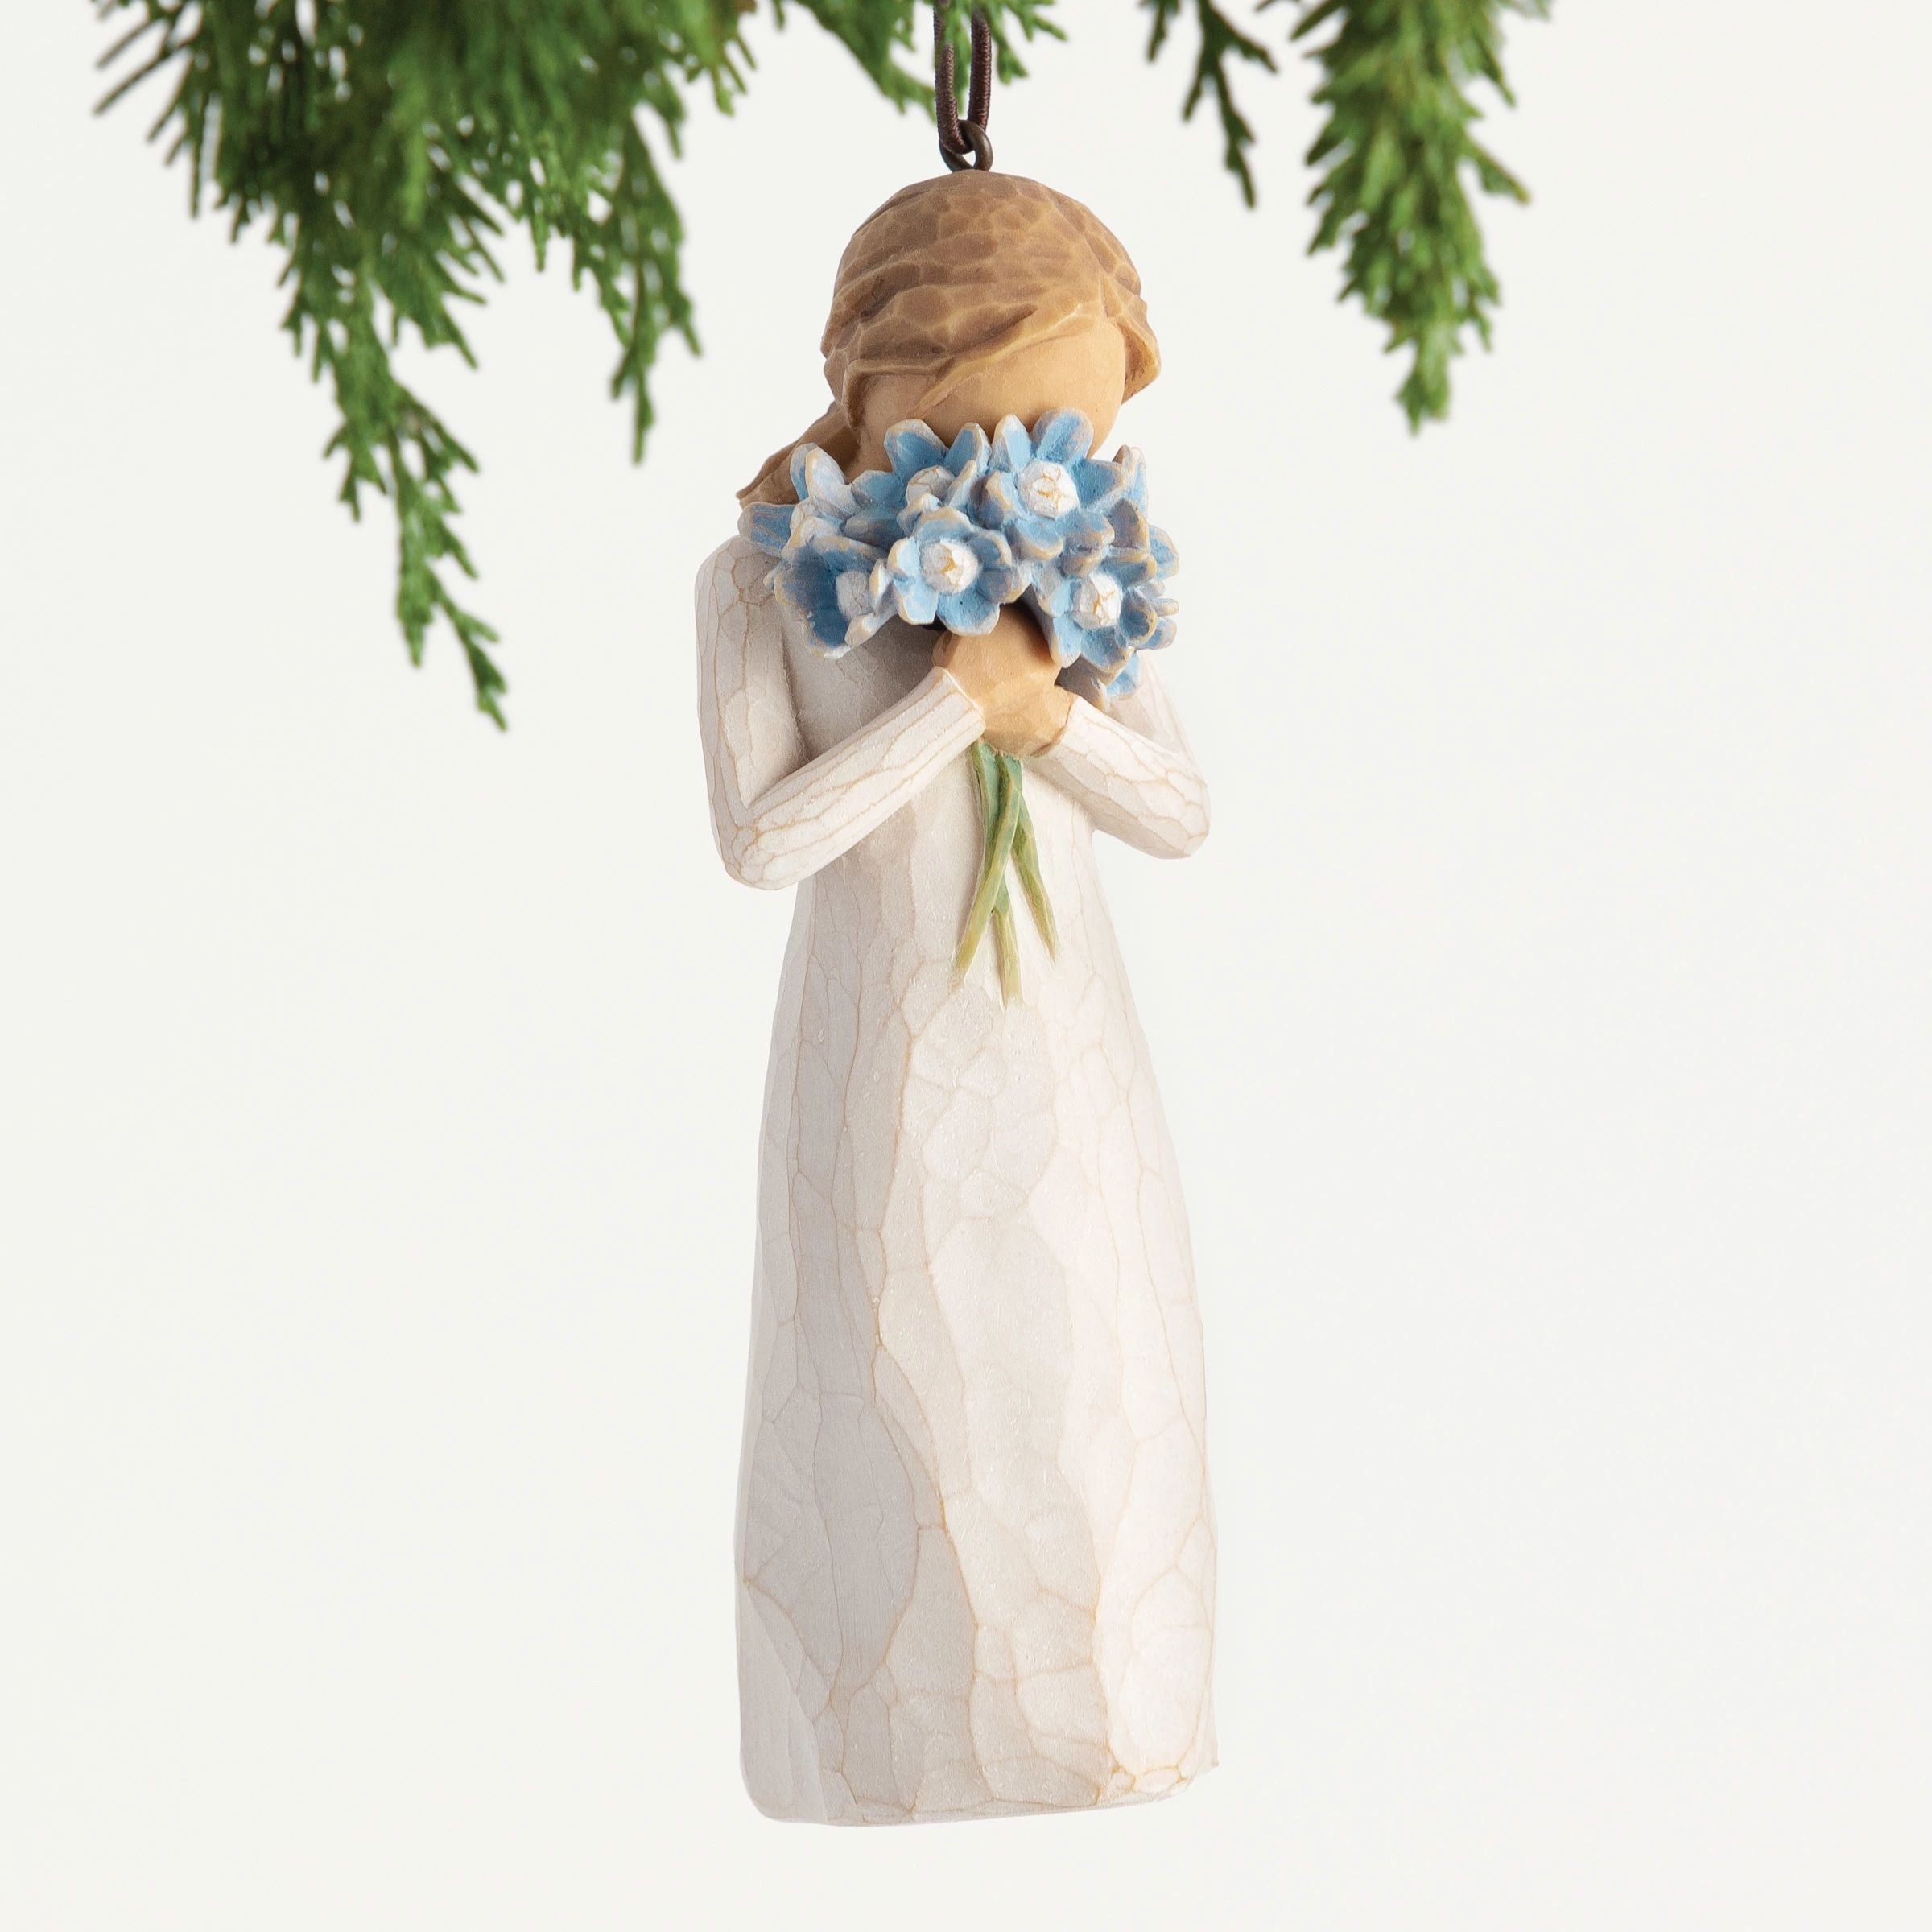 Willow Tree: Forget-Me-Not Hanging Ornament